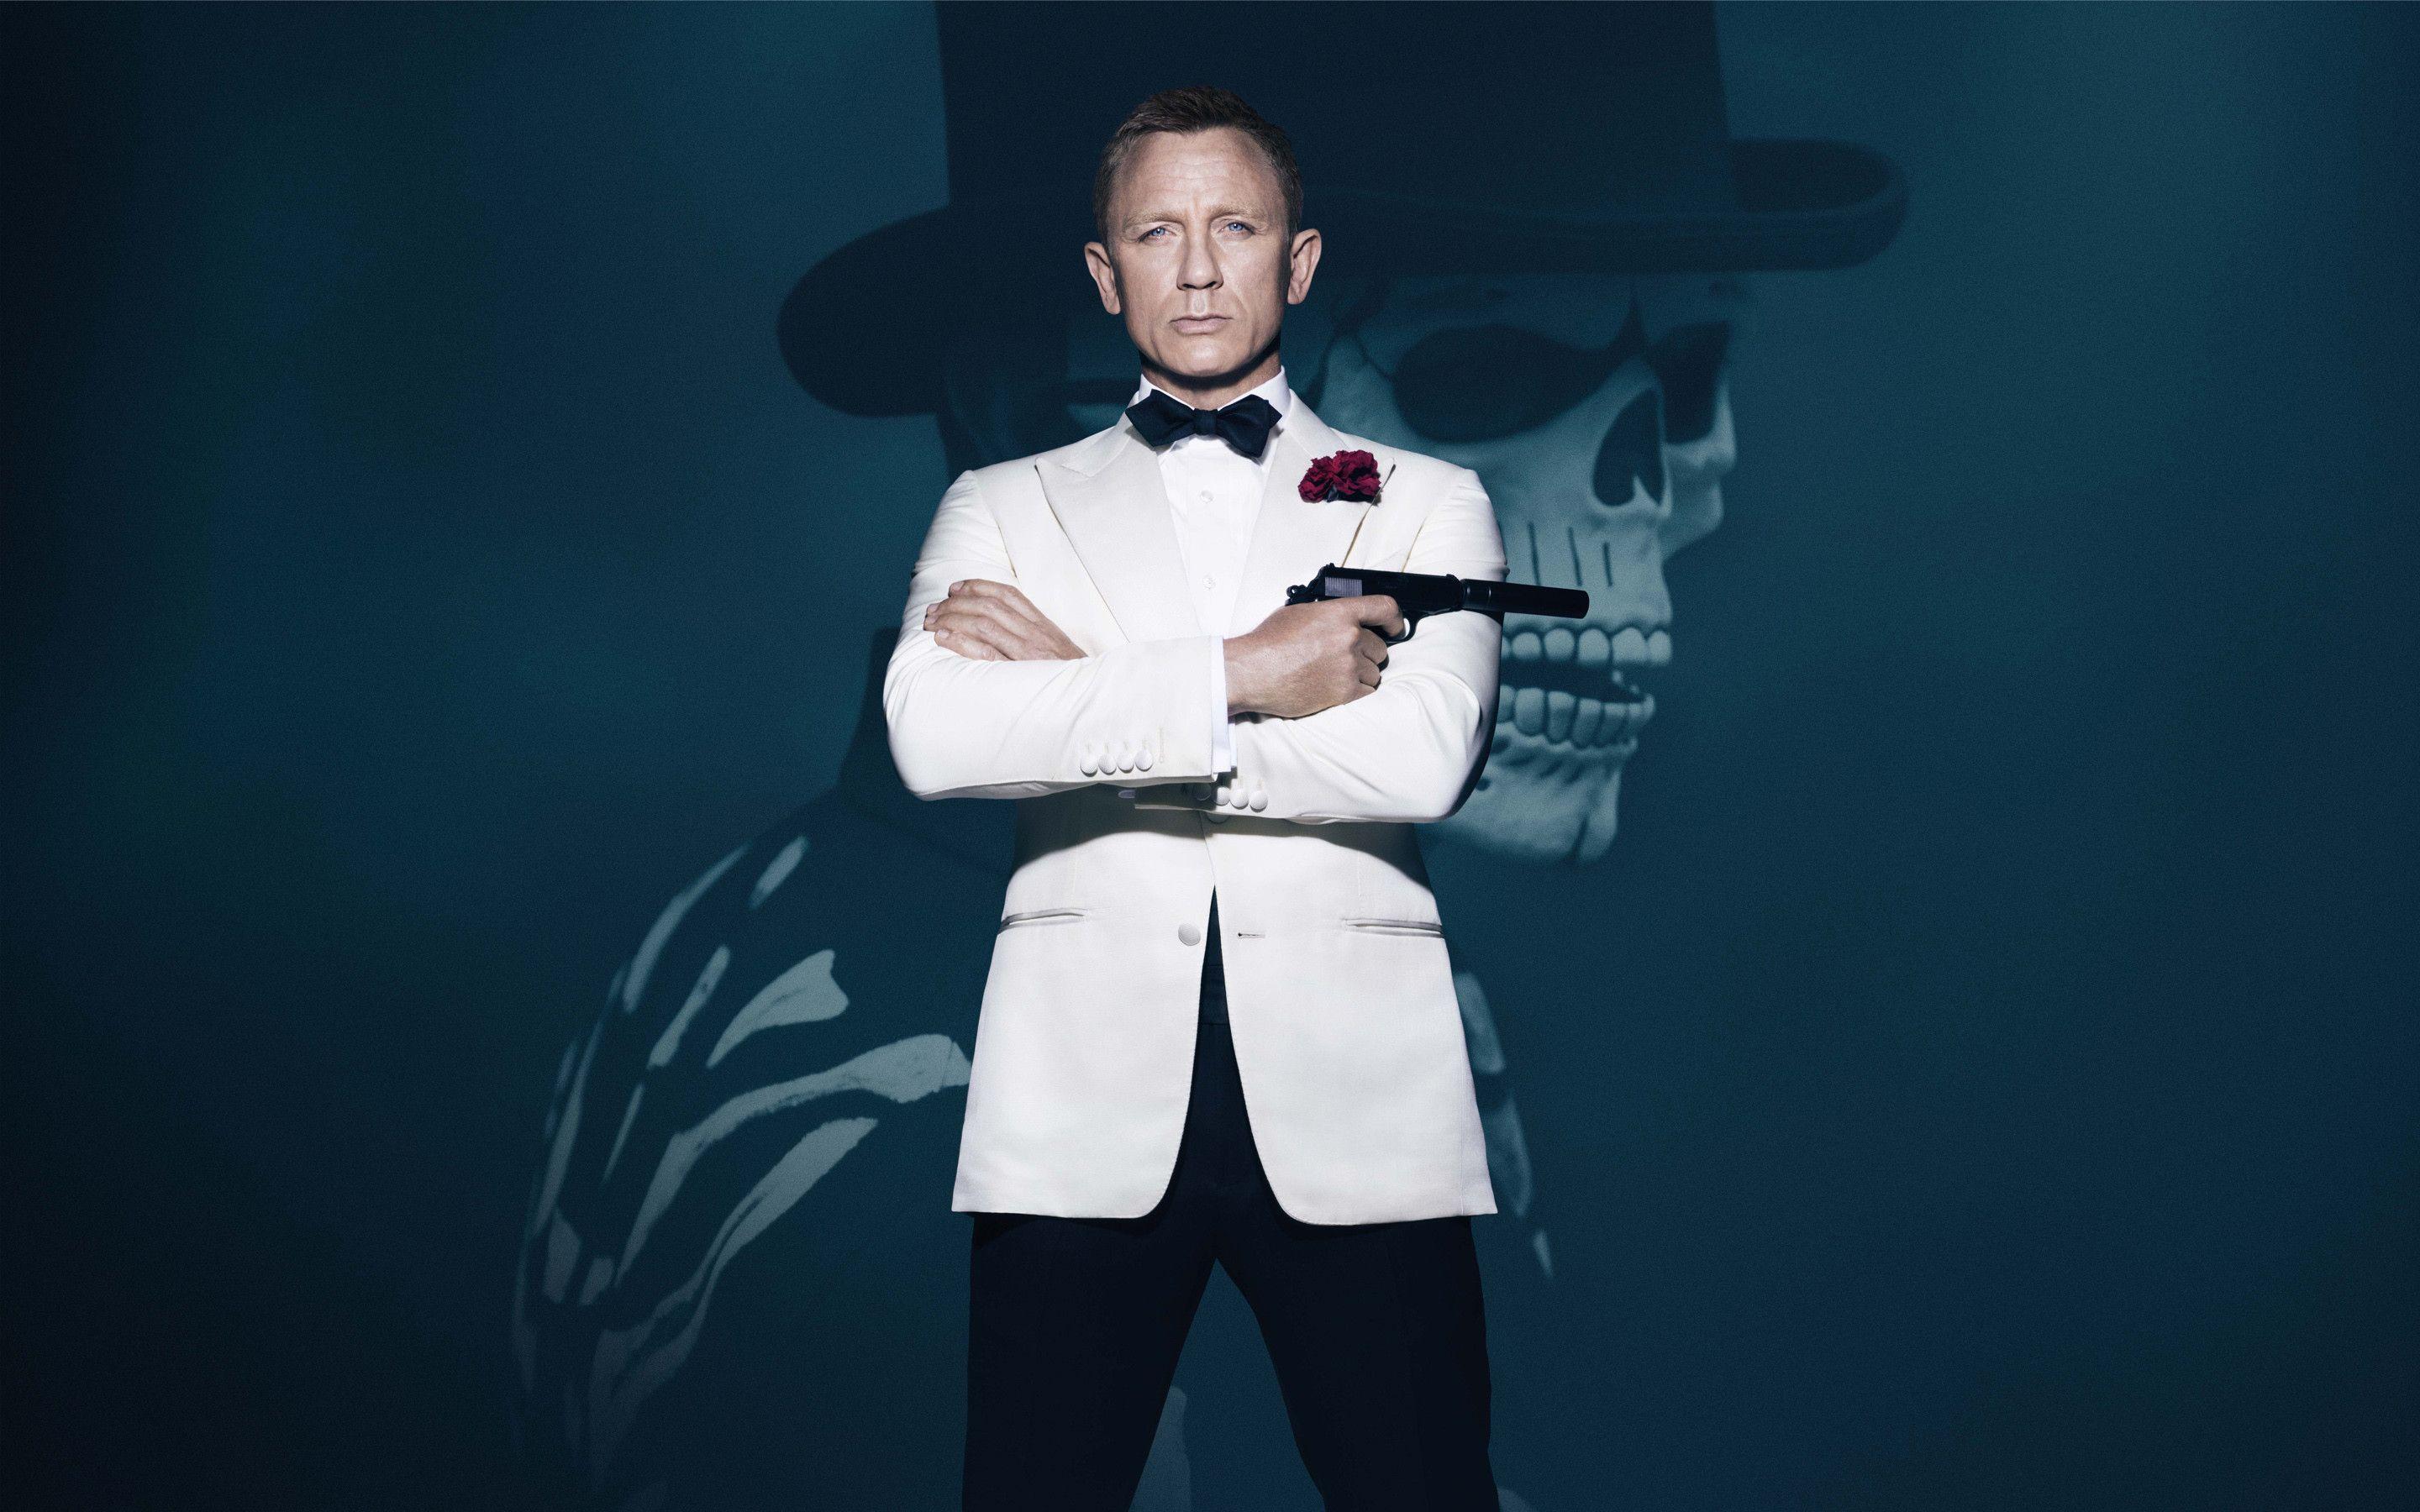 007 Spectre Wallpapers Top Free 007 Spectre Backgrounds Wallpaperaccess